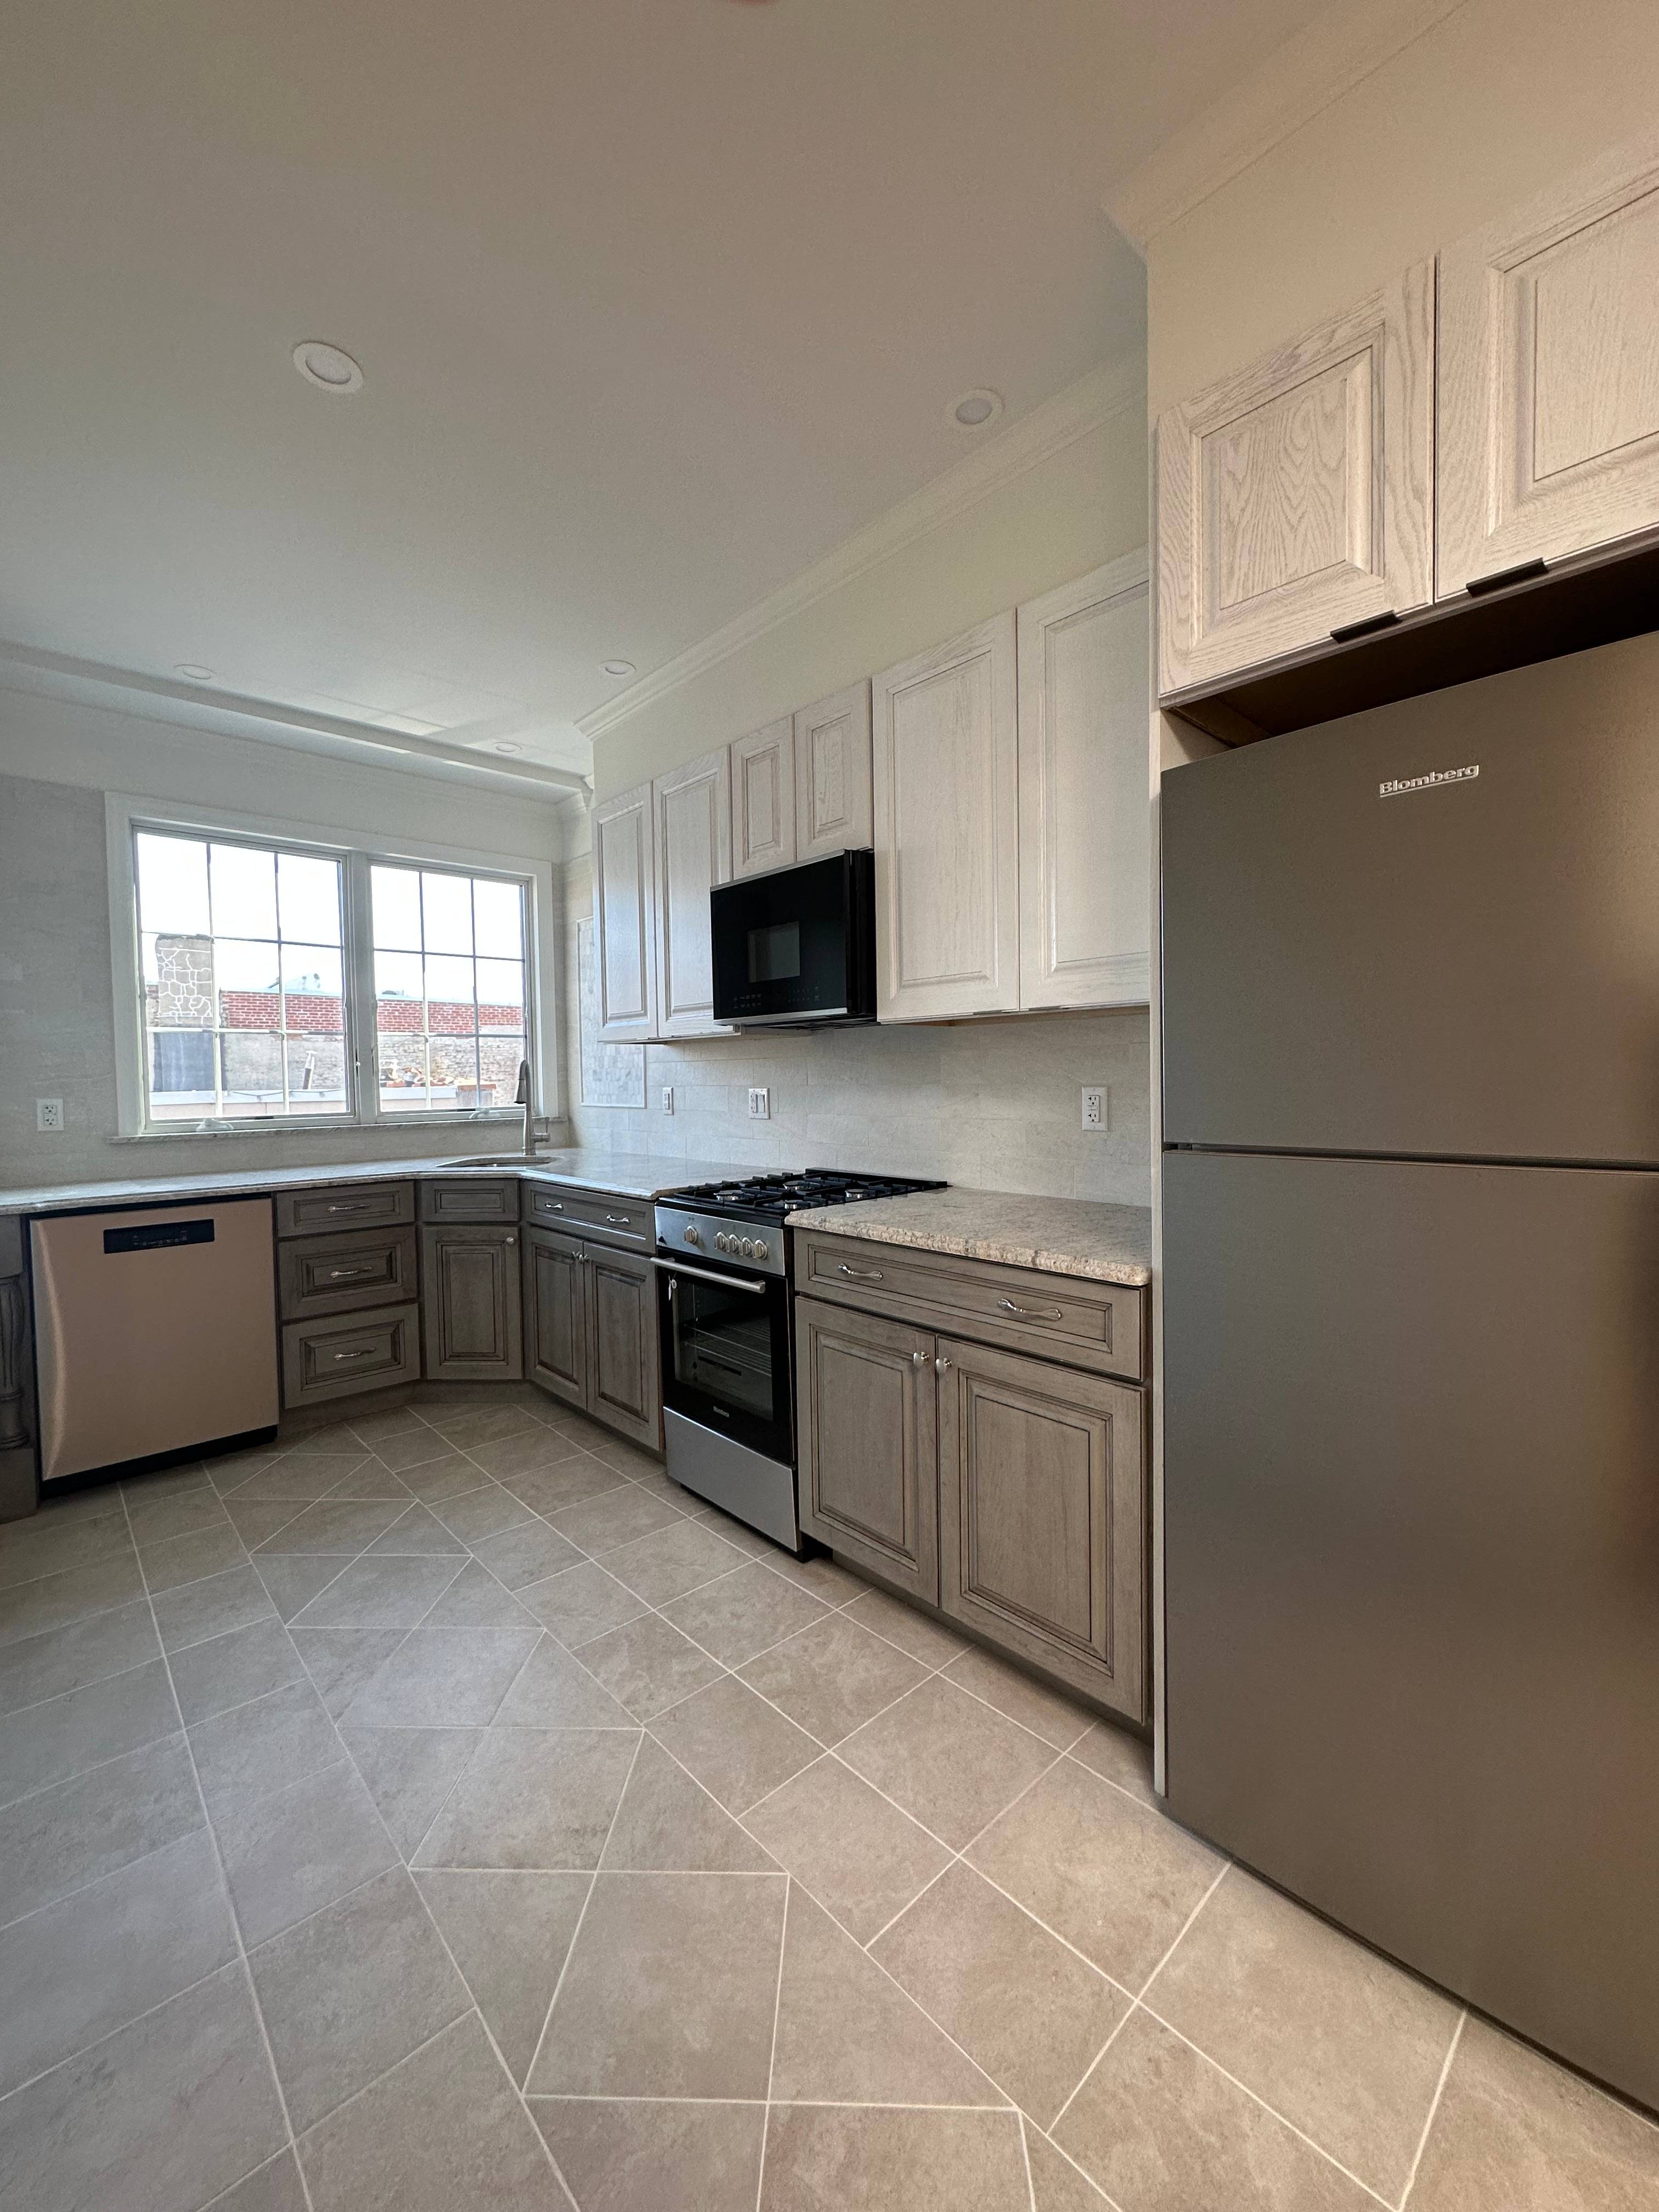 Cobble Hill, 3 Bedroom 2 Bath, 1, 200 SF Brand New, Entirely Renovated, Well Proportioned Apt ; New Windows, Highlighting an Abundance of Natural Light ; Chef s Kitchen has ...